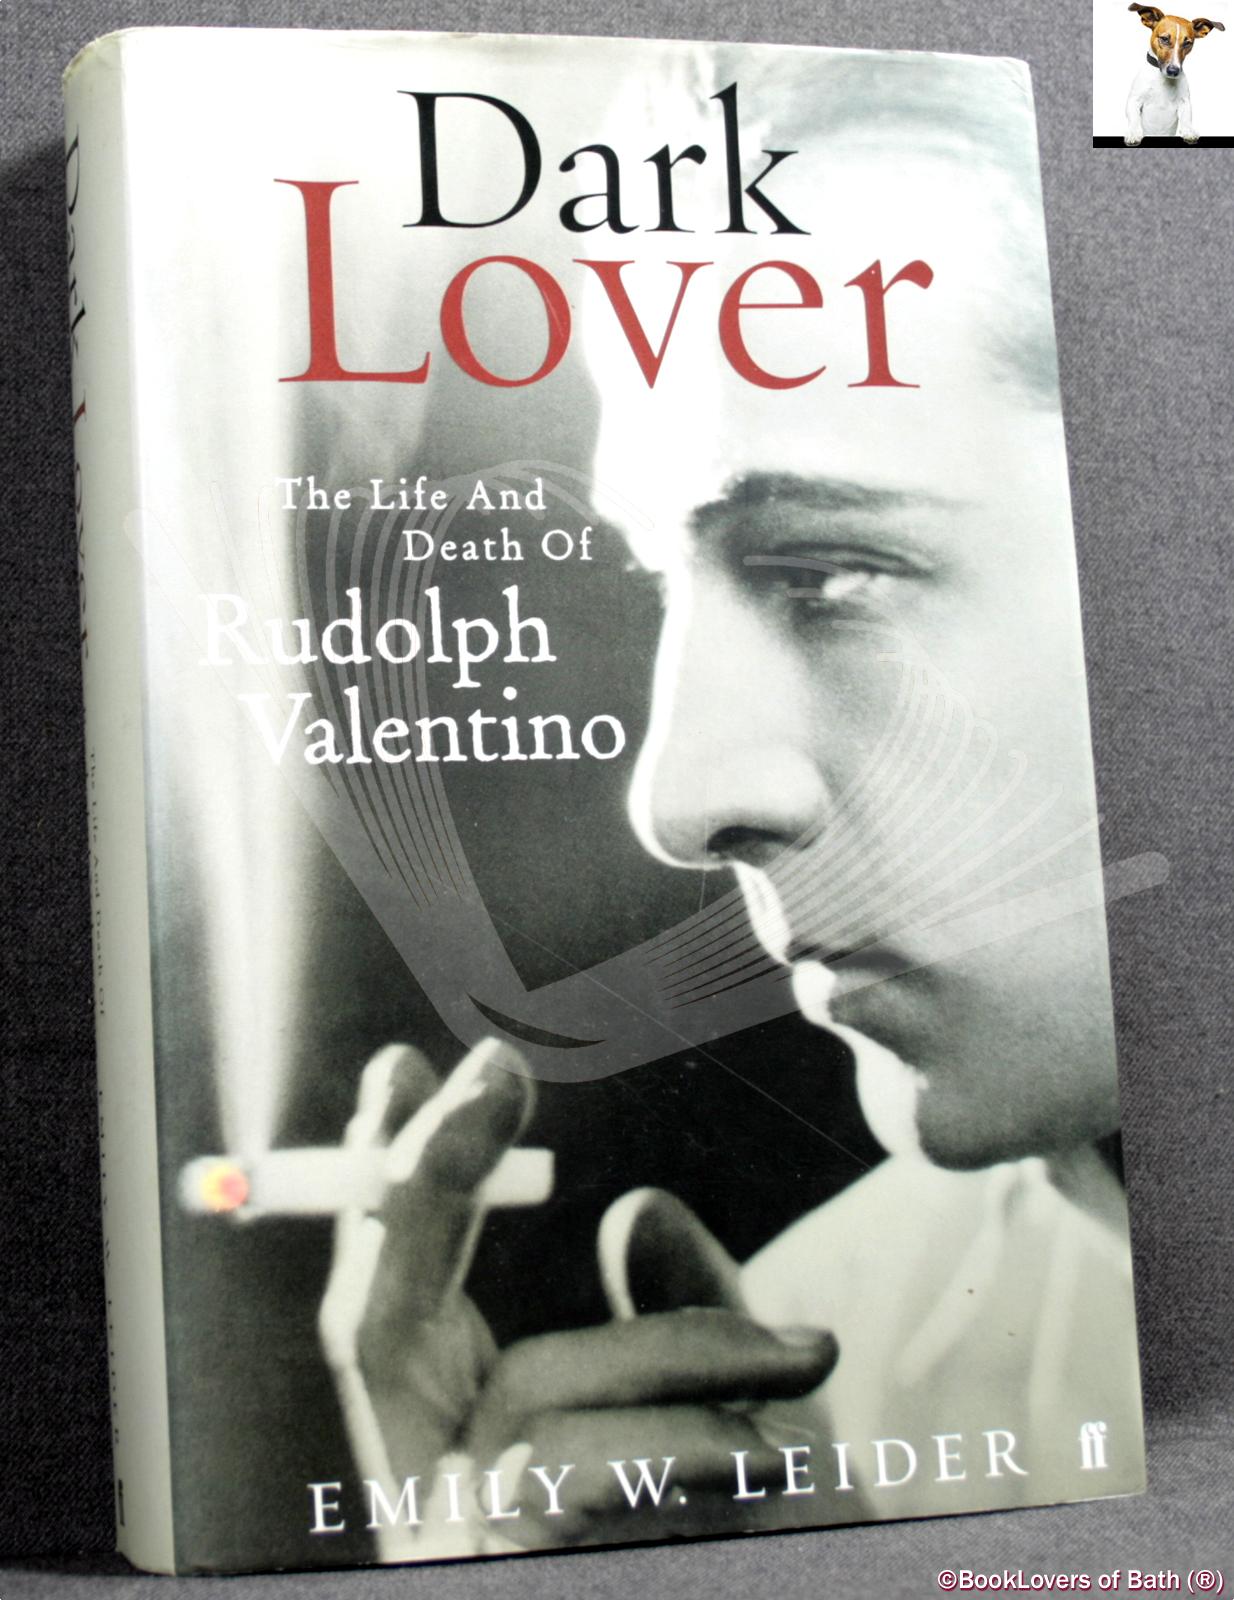 Dark Lover: The Life and Death of Rudolph Valentino - Emily Wortis Leider